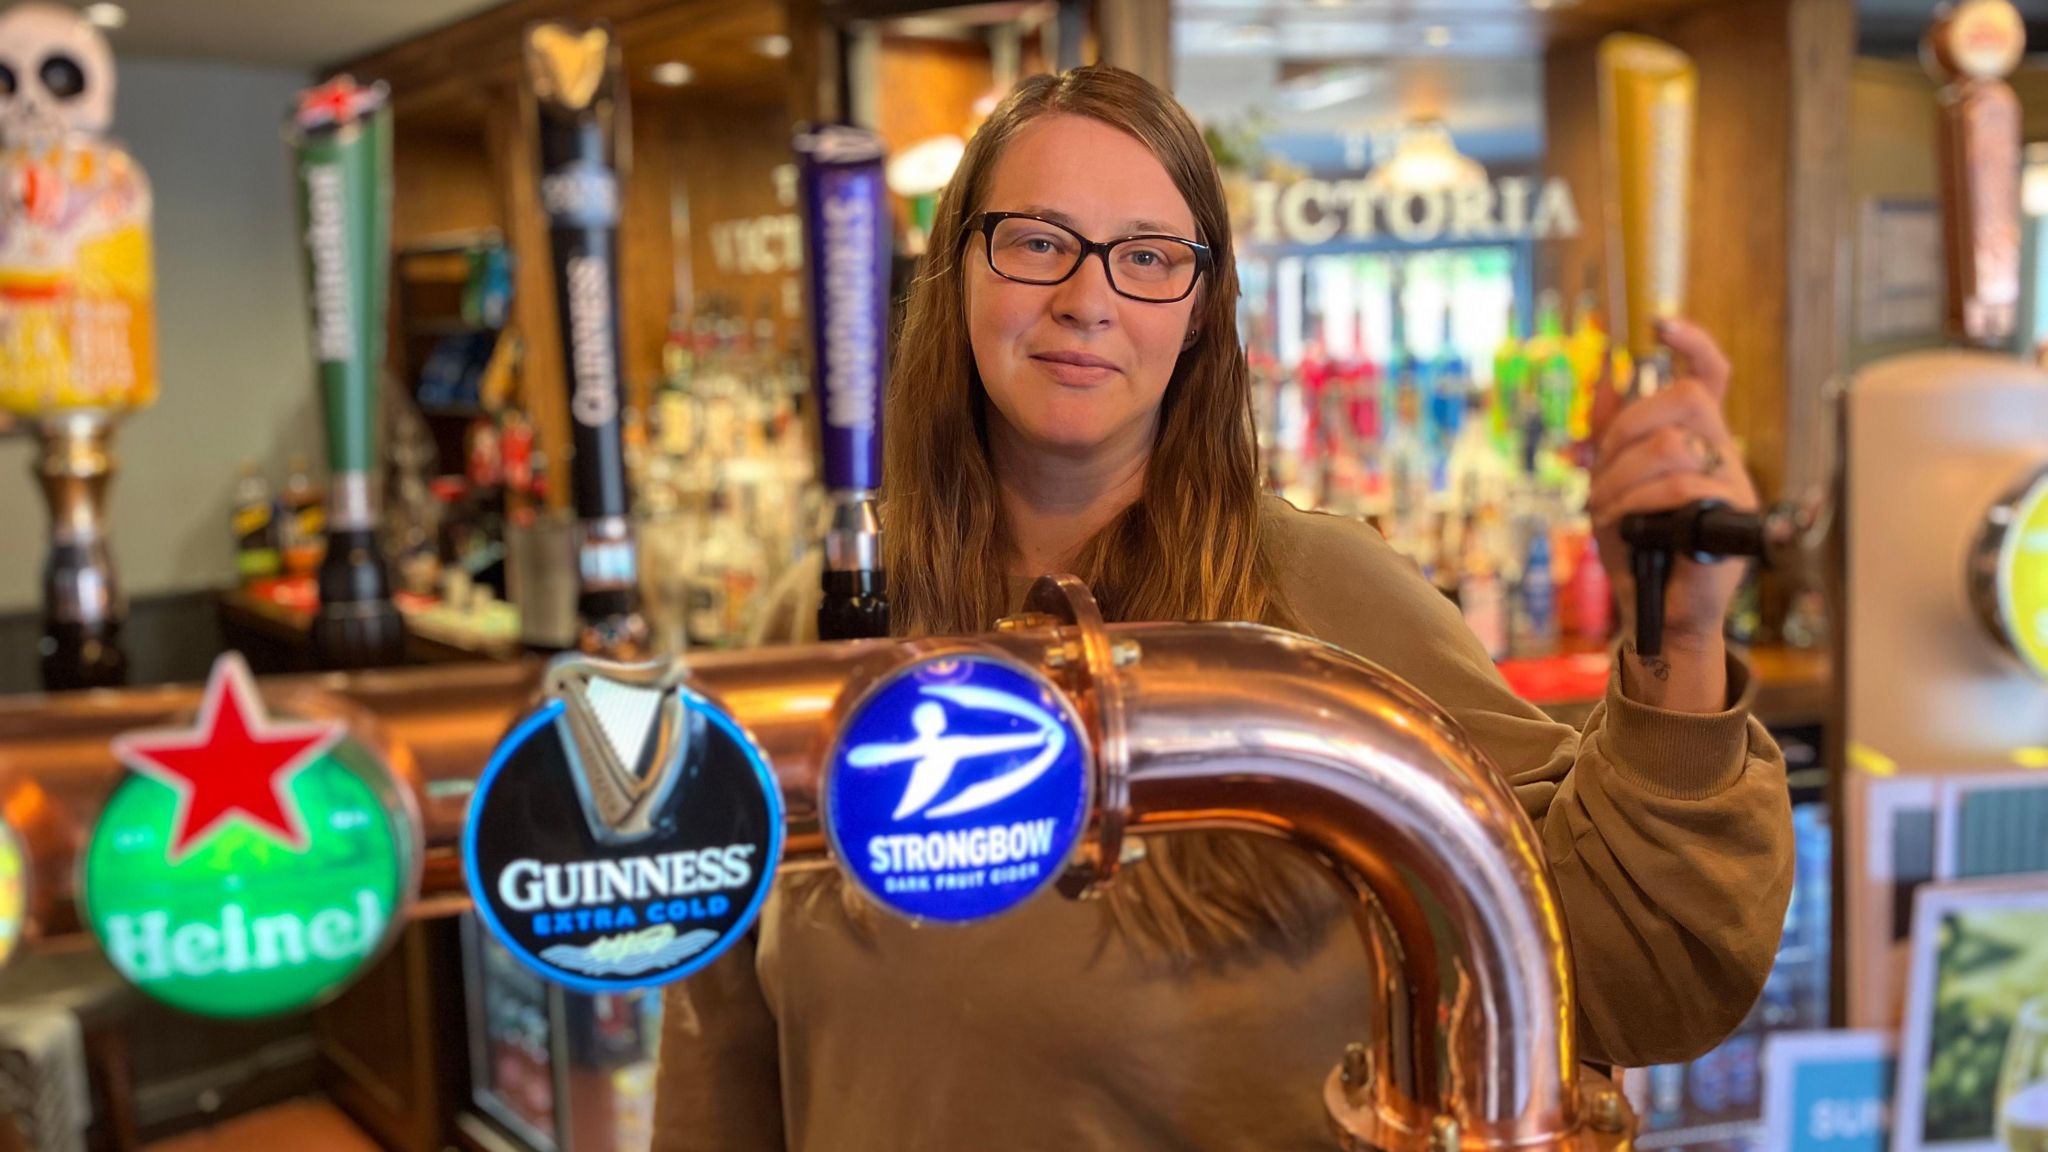 Kirsty Jones operator of The Victoria standing at the bar with beer taps visible